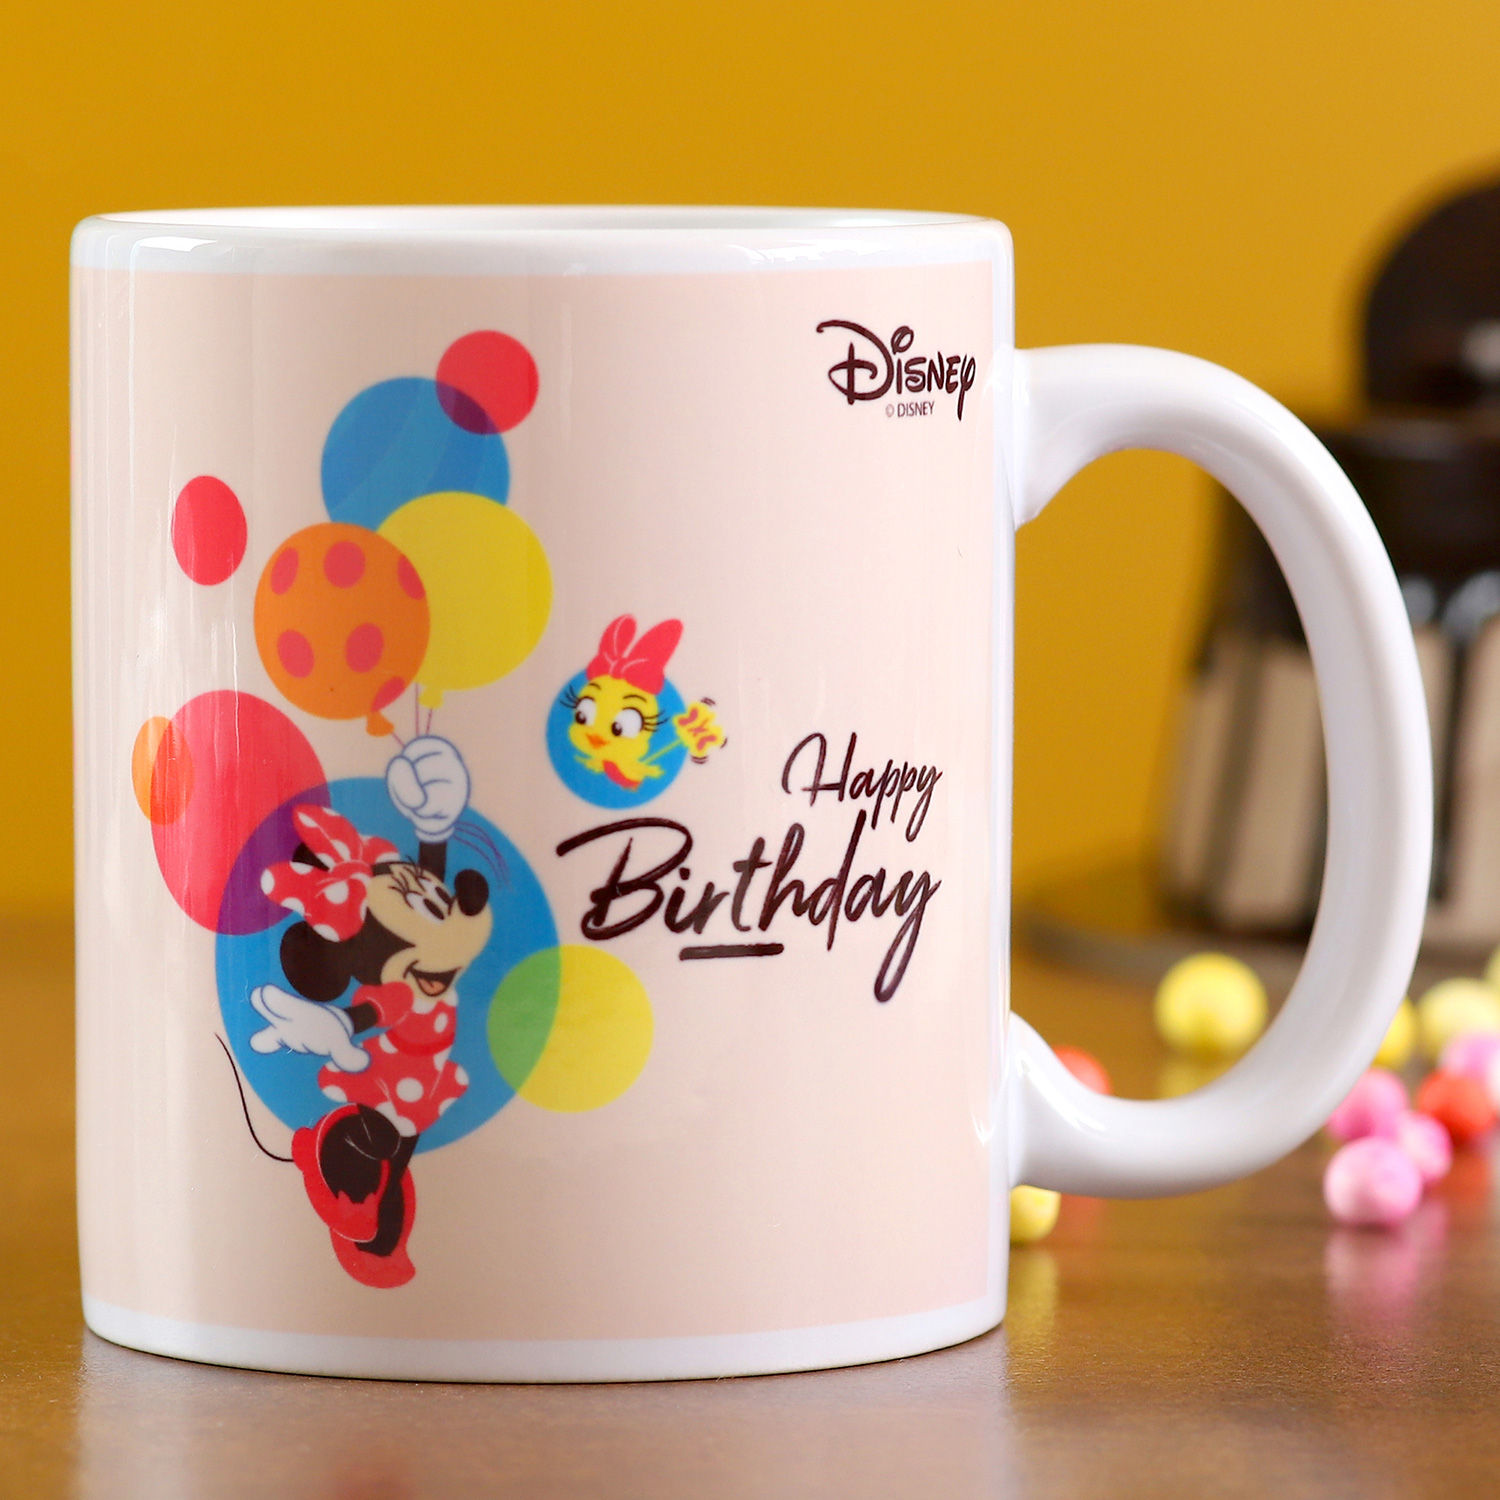 Buy/Send Minnie Mouse Birthday Special Mug Online- FNP